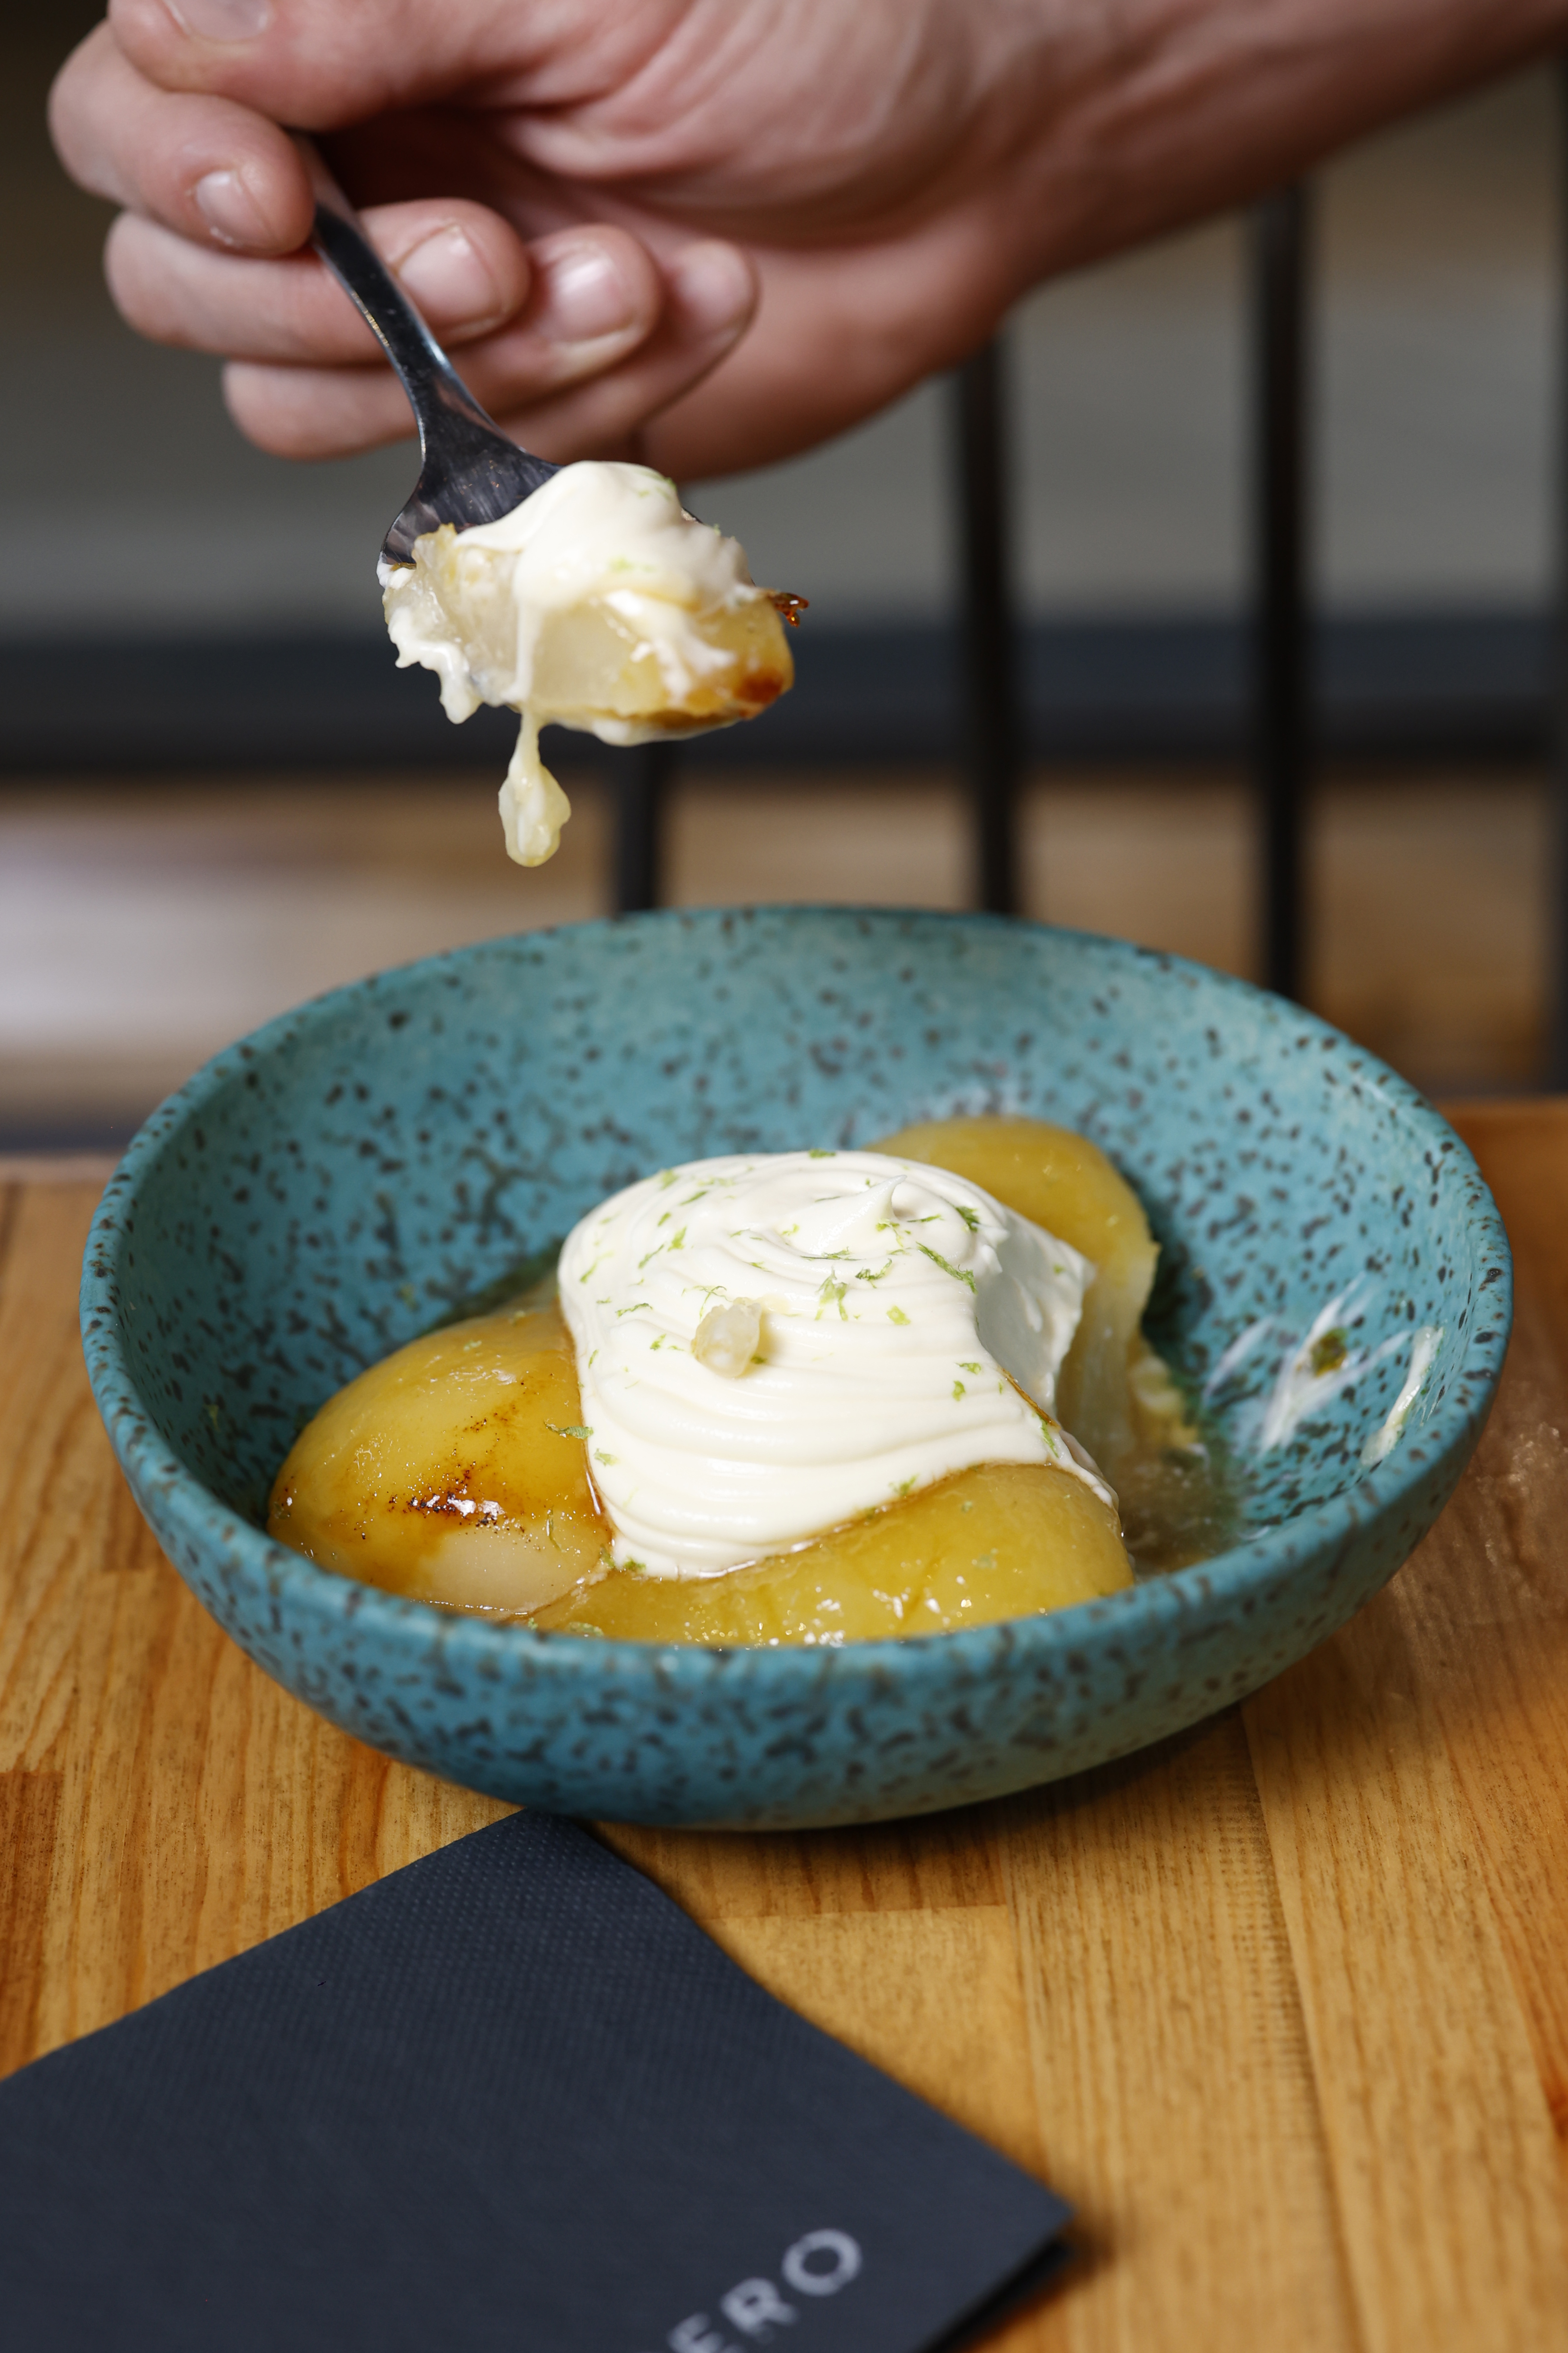 Pears with white chocolate and lime cream.